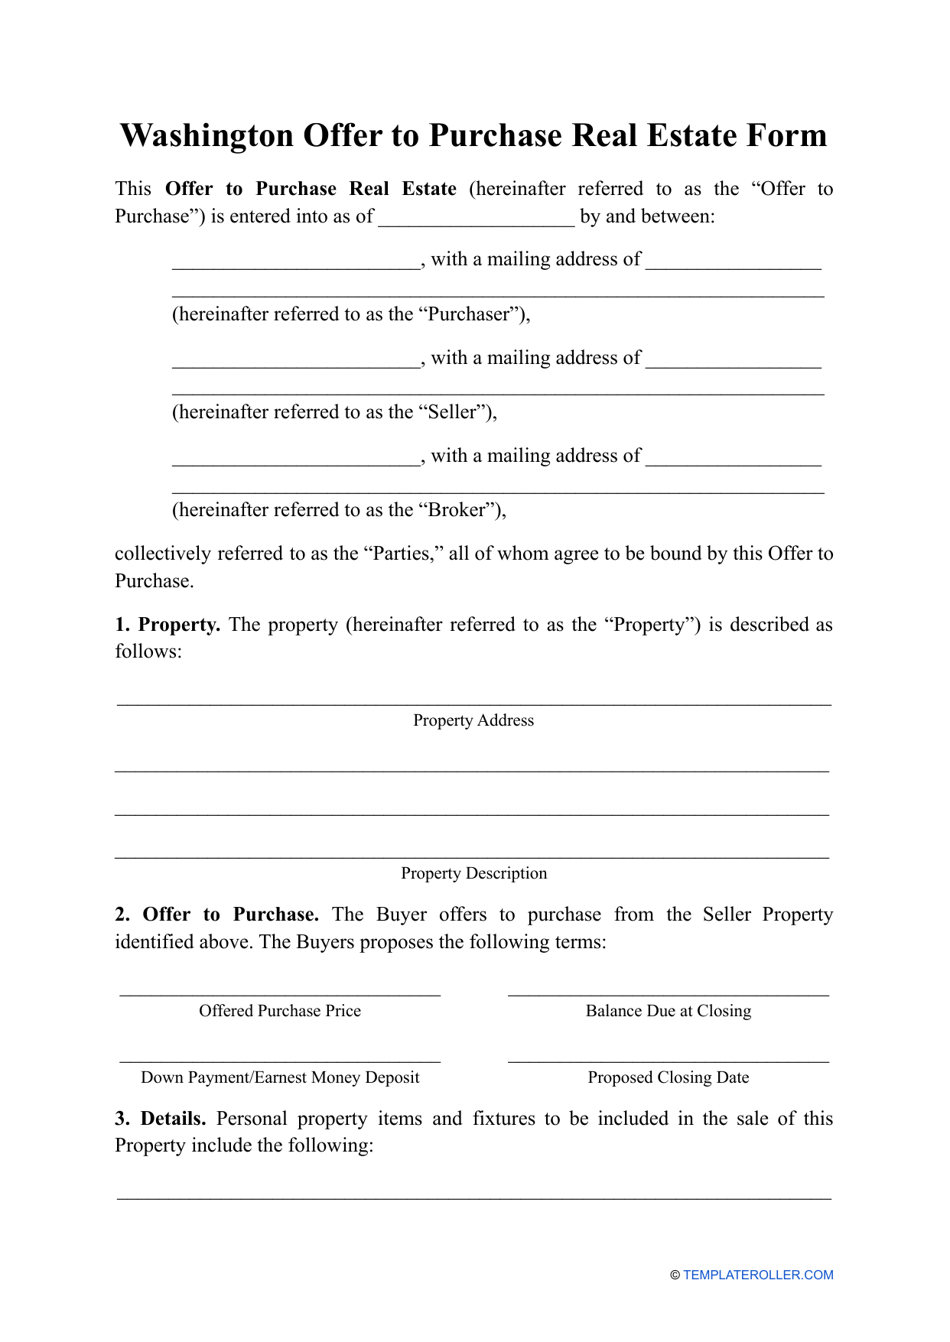 Offer to Purchase Real Estate Form - Washington, Page 1